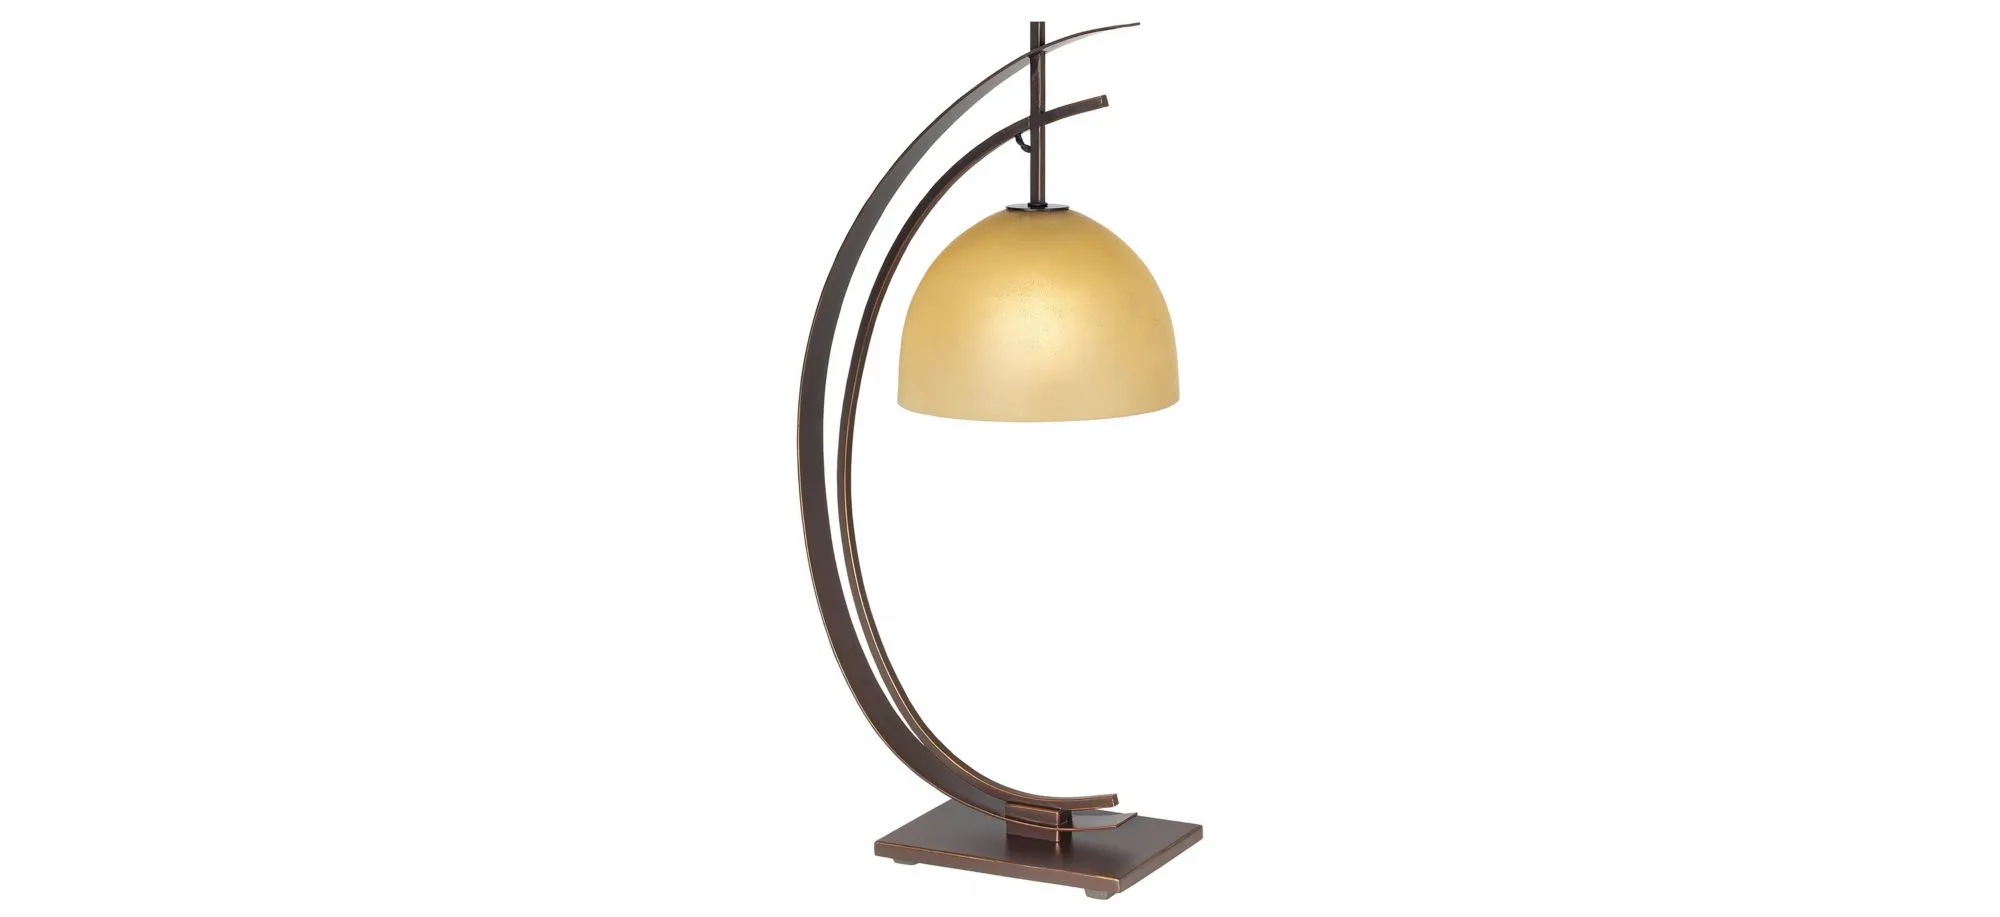 Orbit Table Lamp in bronze w/gold edge by Pacific Coast